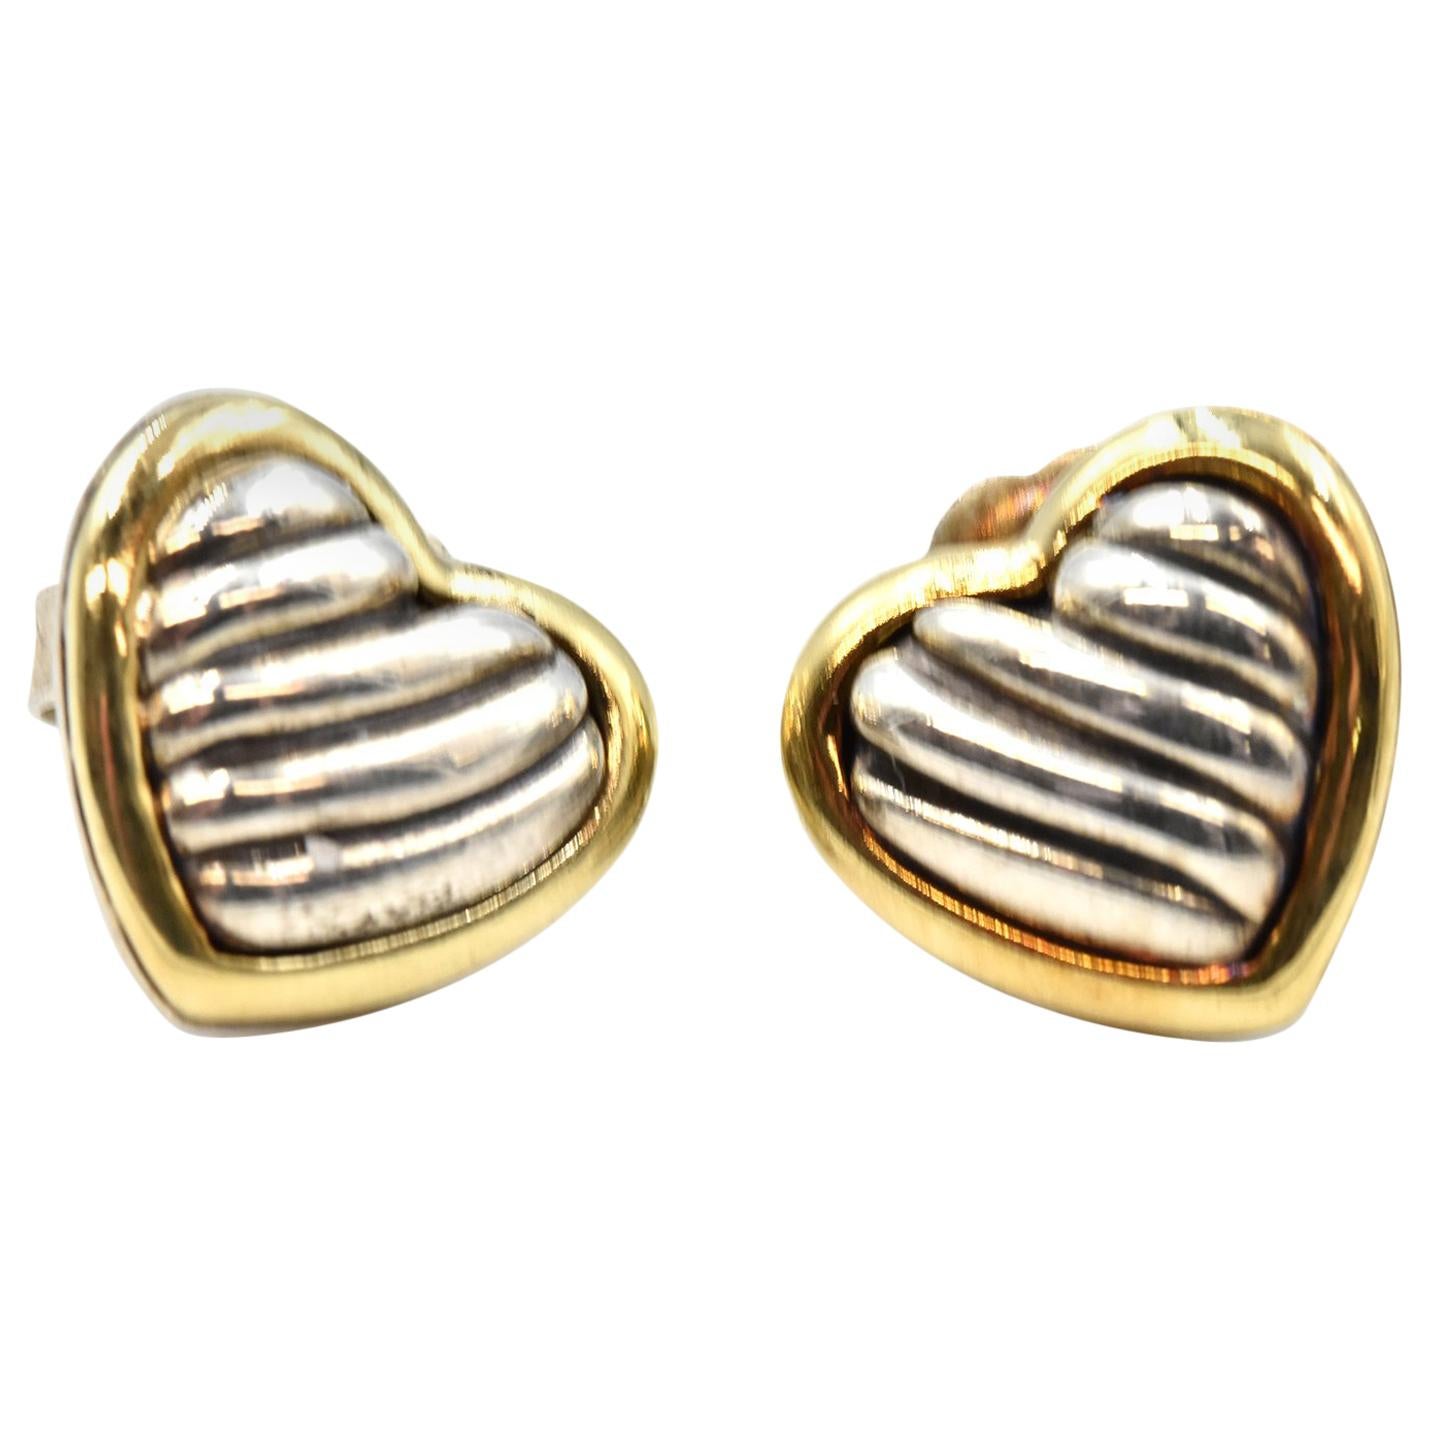 David Yurman Sterling Silver and 18 Karat Yellow Gold Heart Cable Stud Earrings